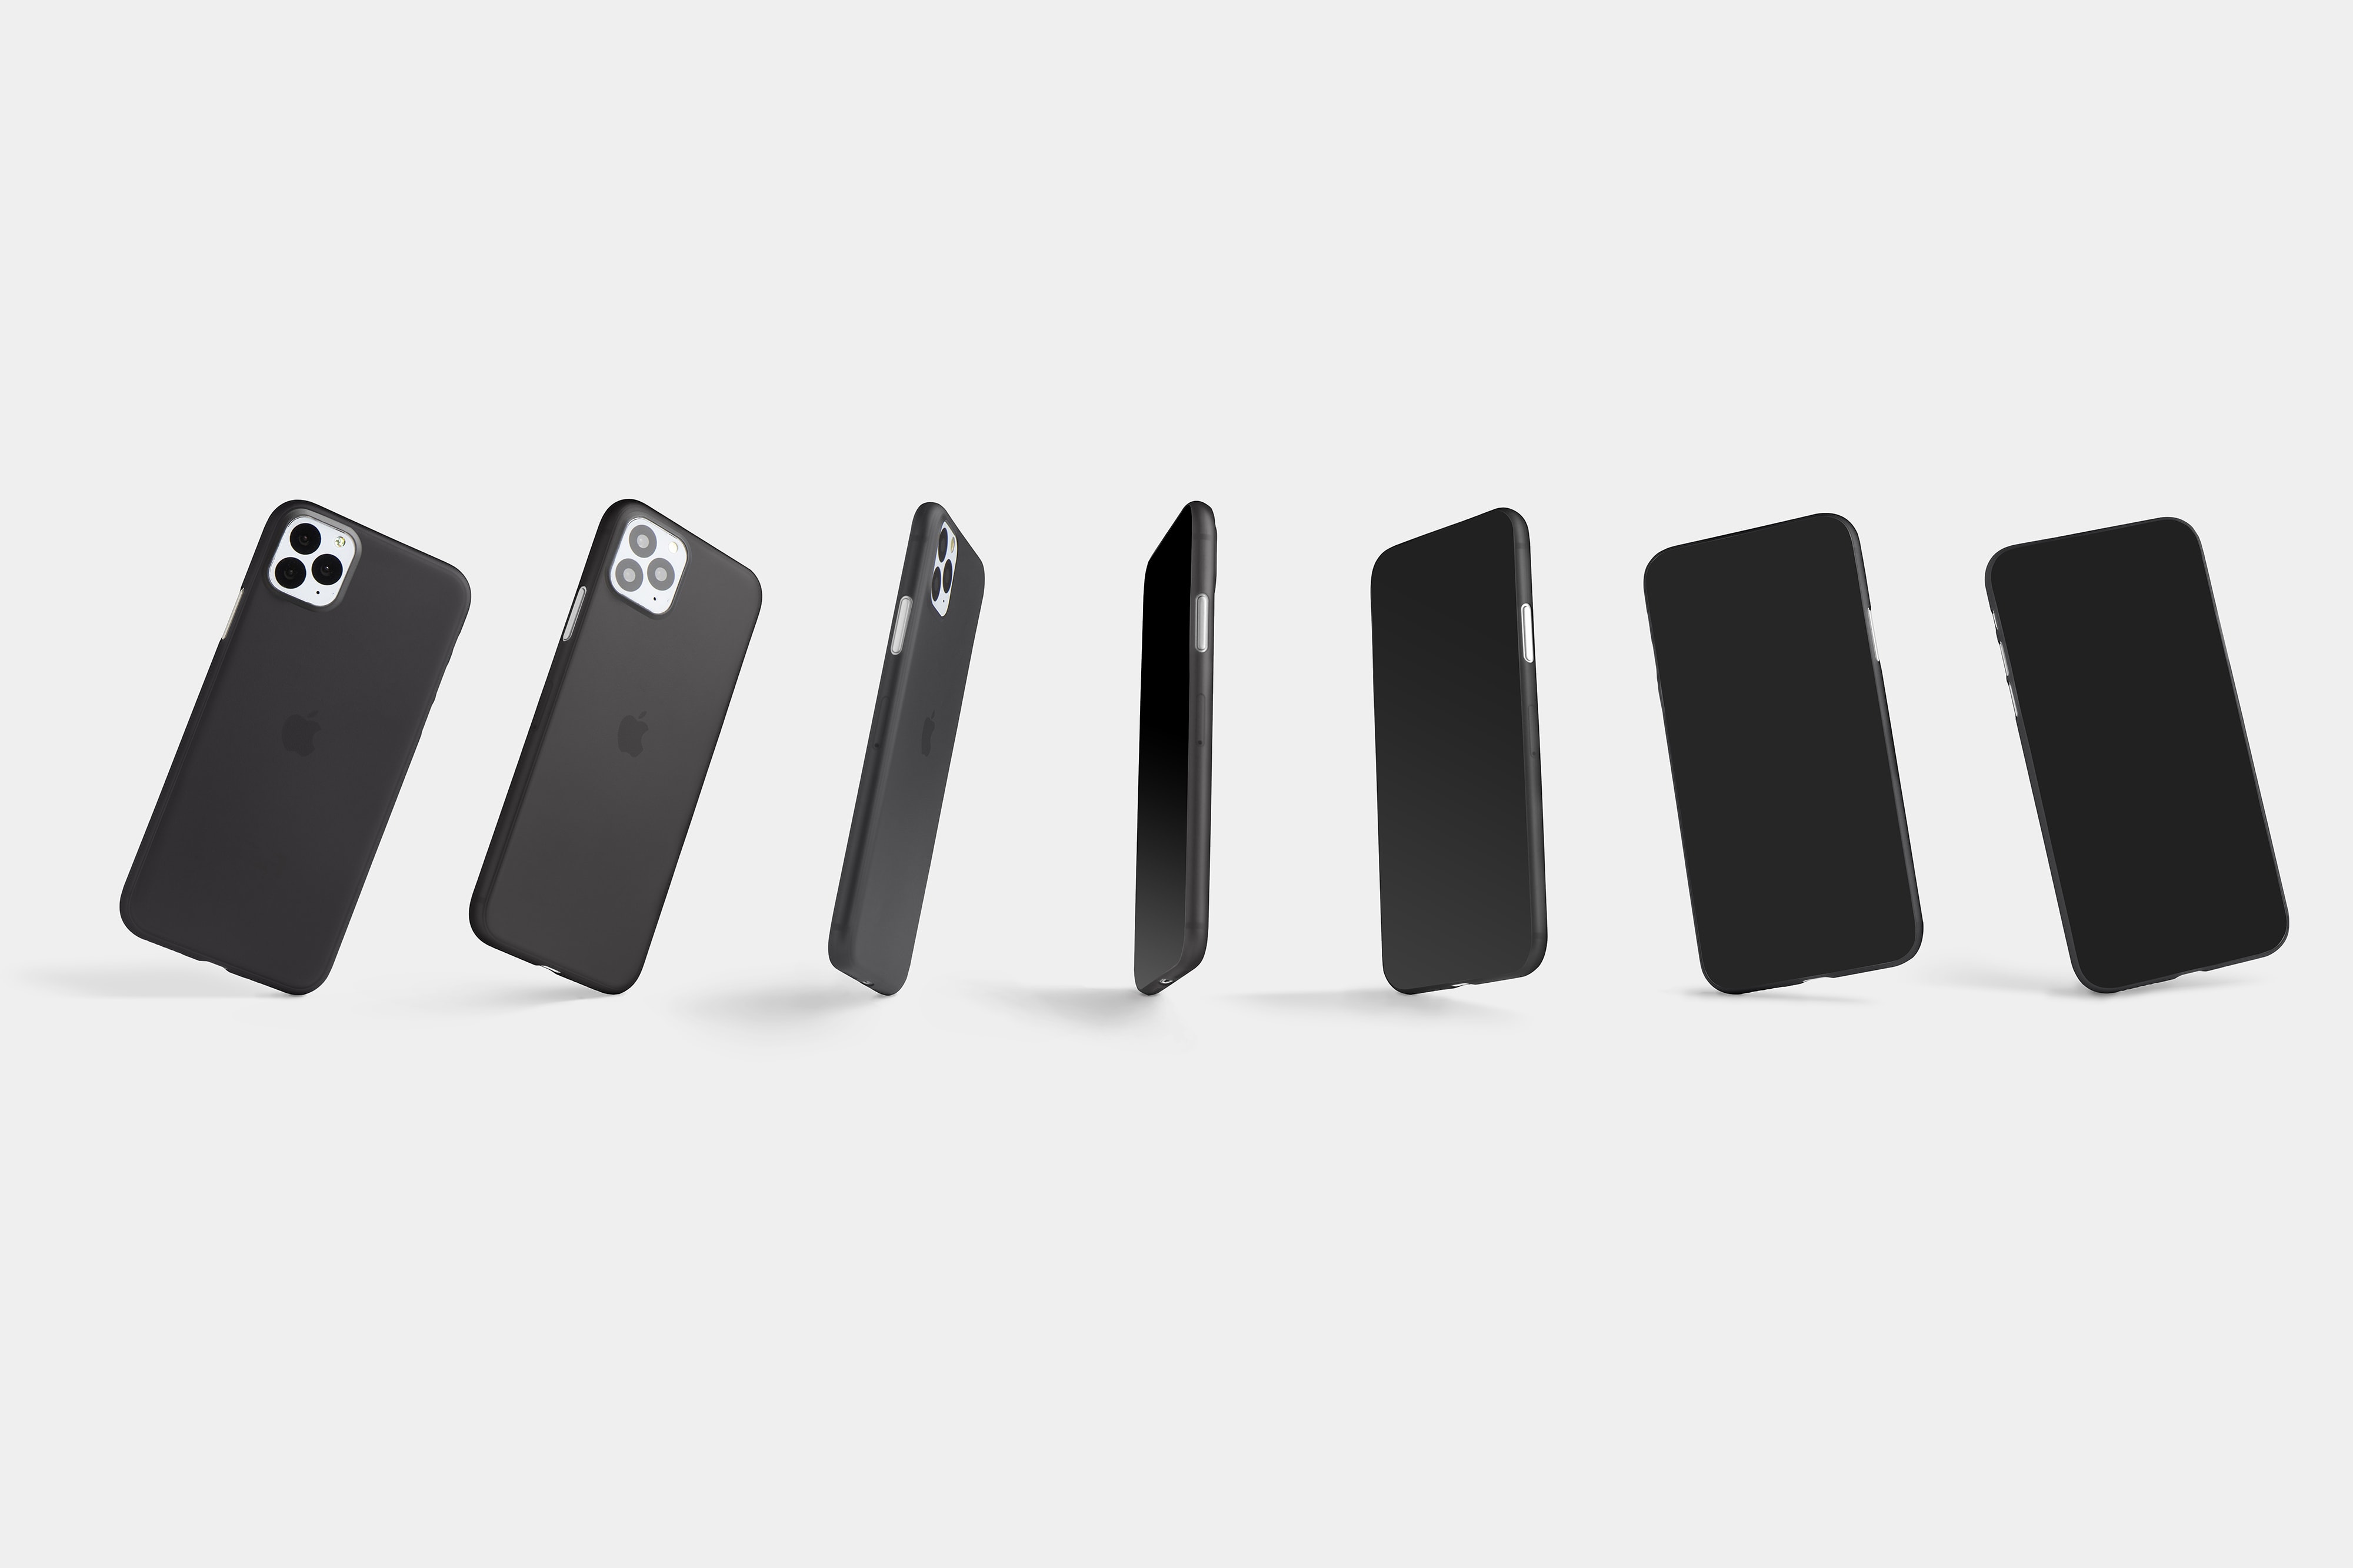 Super-thin Totallee iPhone 11 cases are now available on Amazon.com.